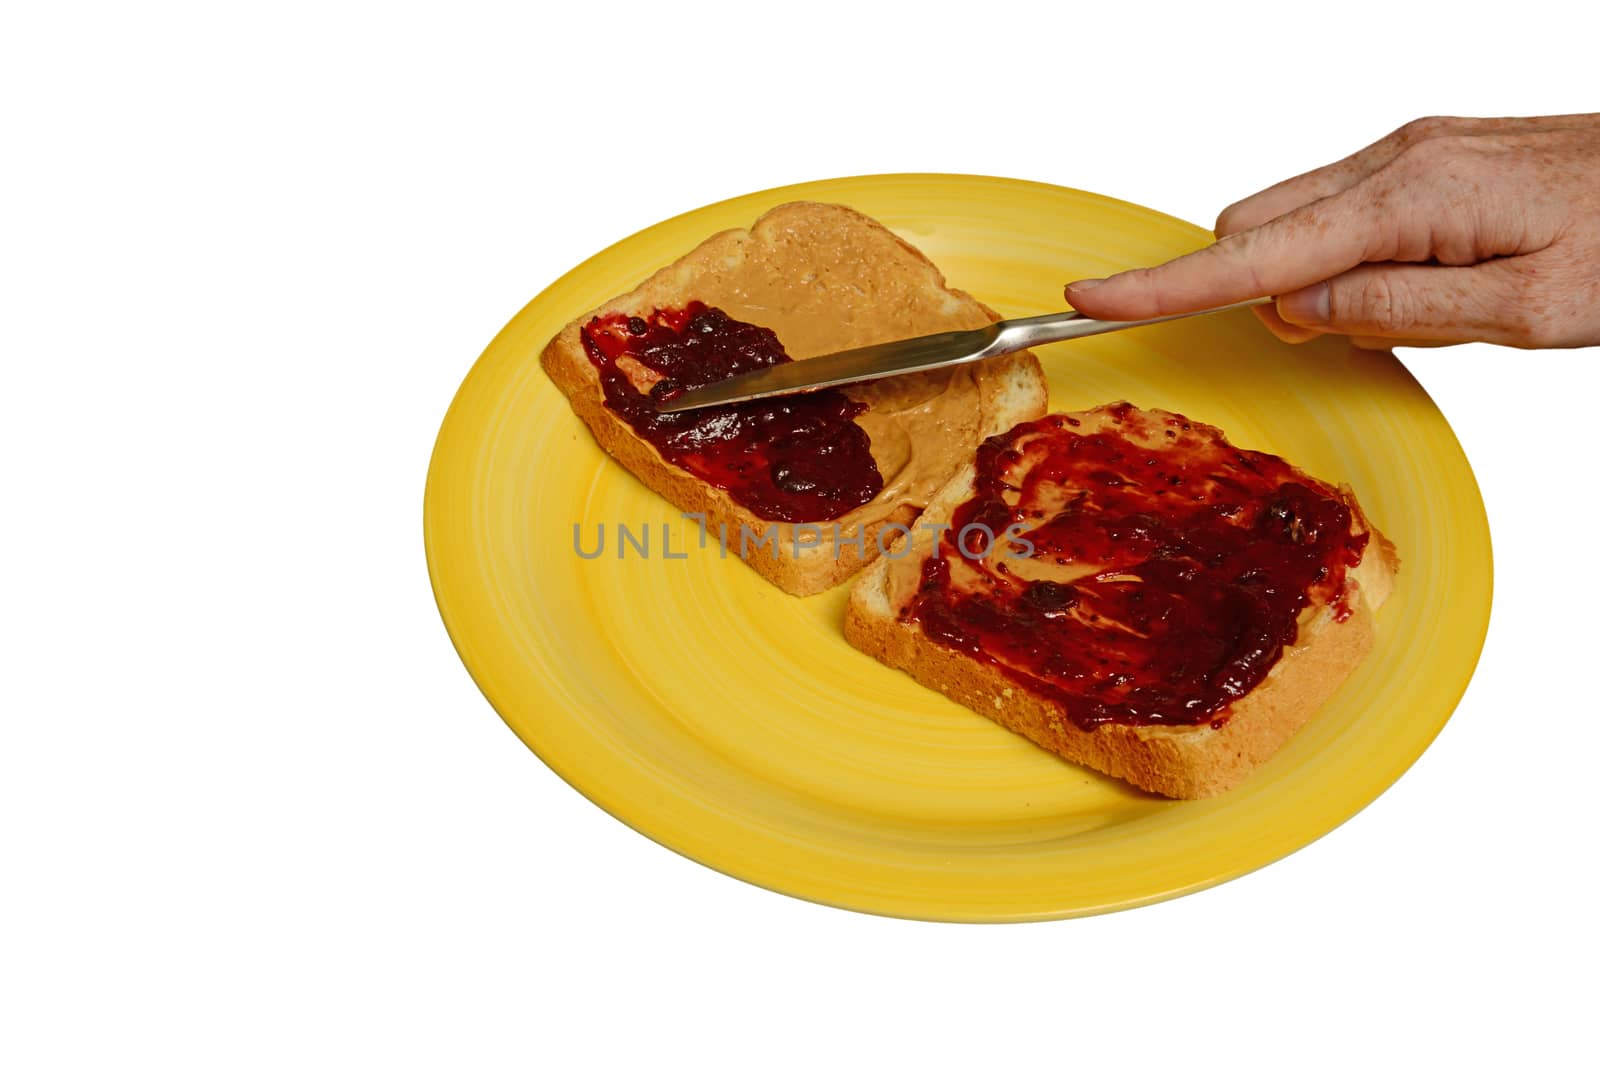 making a peanut butter and jelly sandwich on white